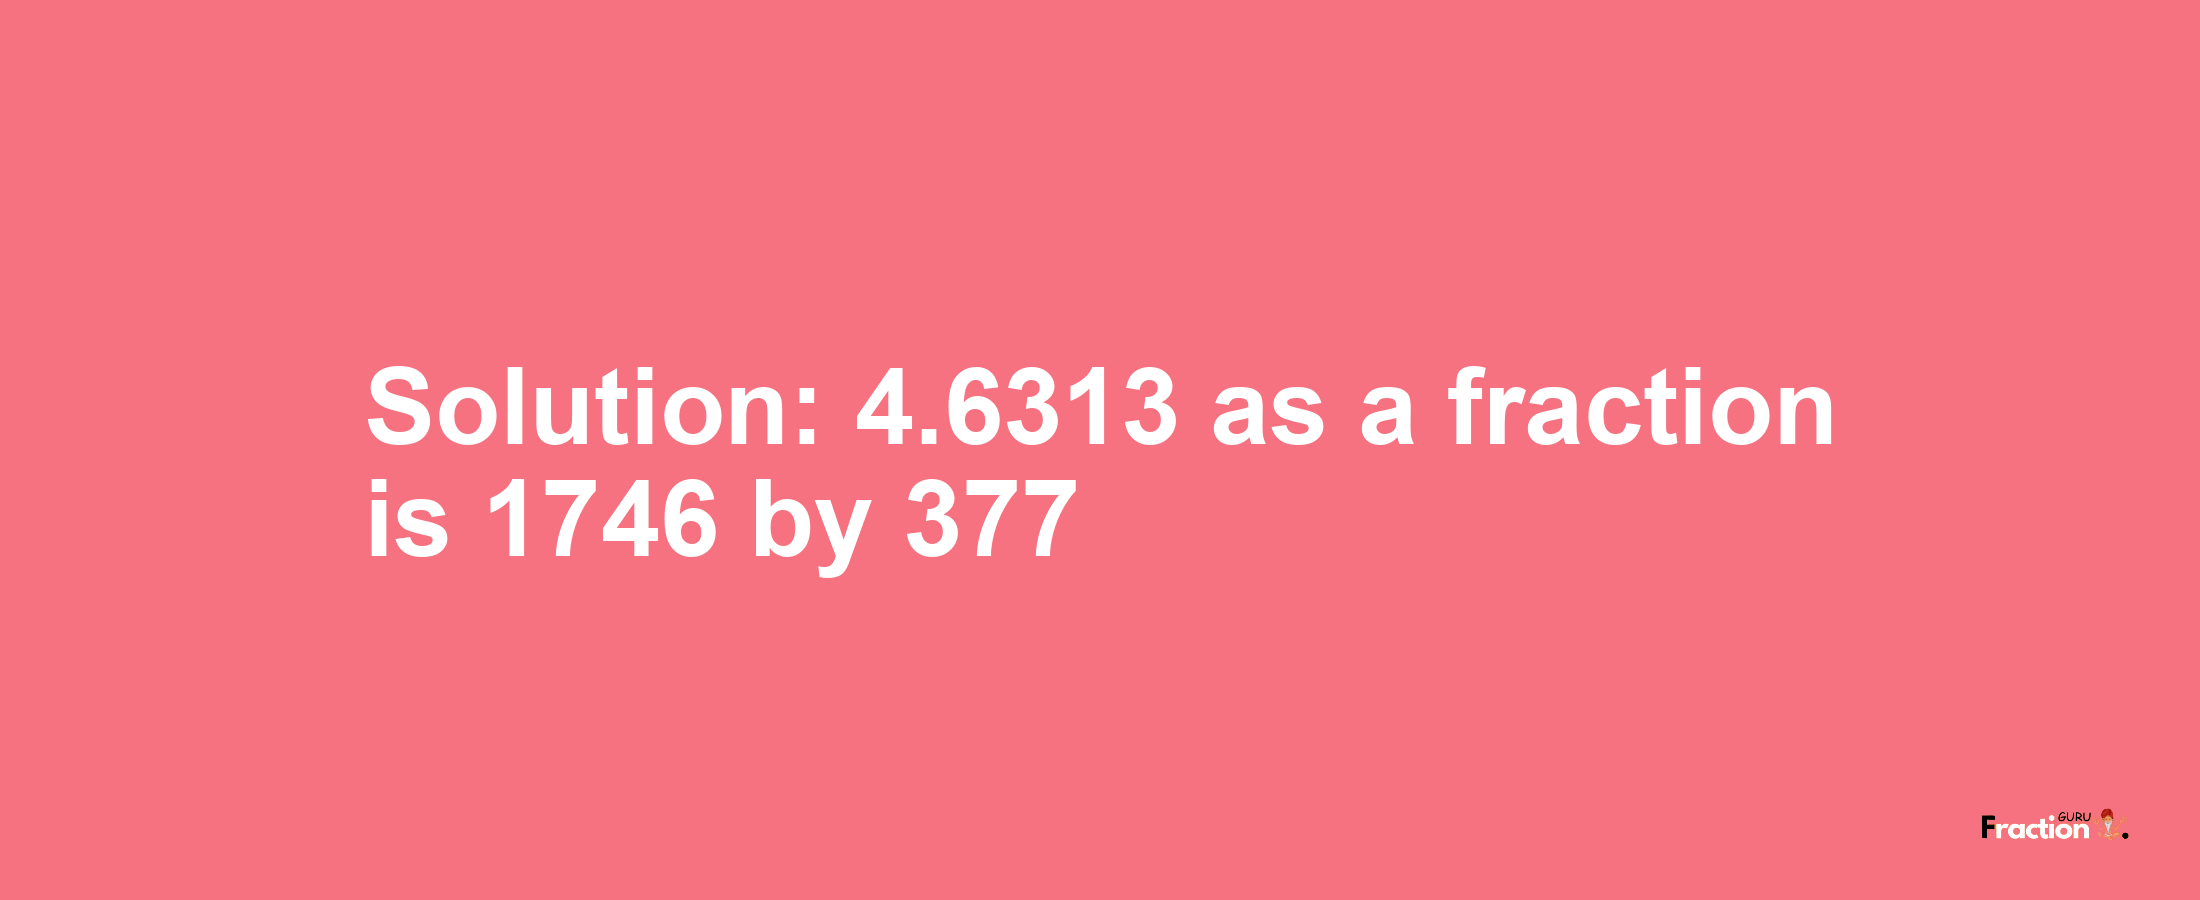 Solution:4.6313 as a fraction is 1746/377